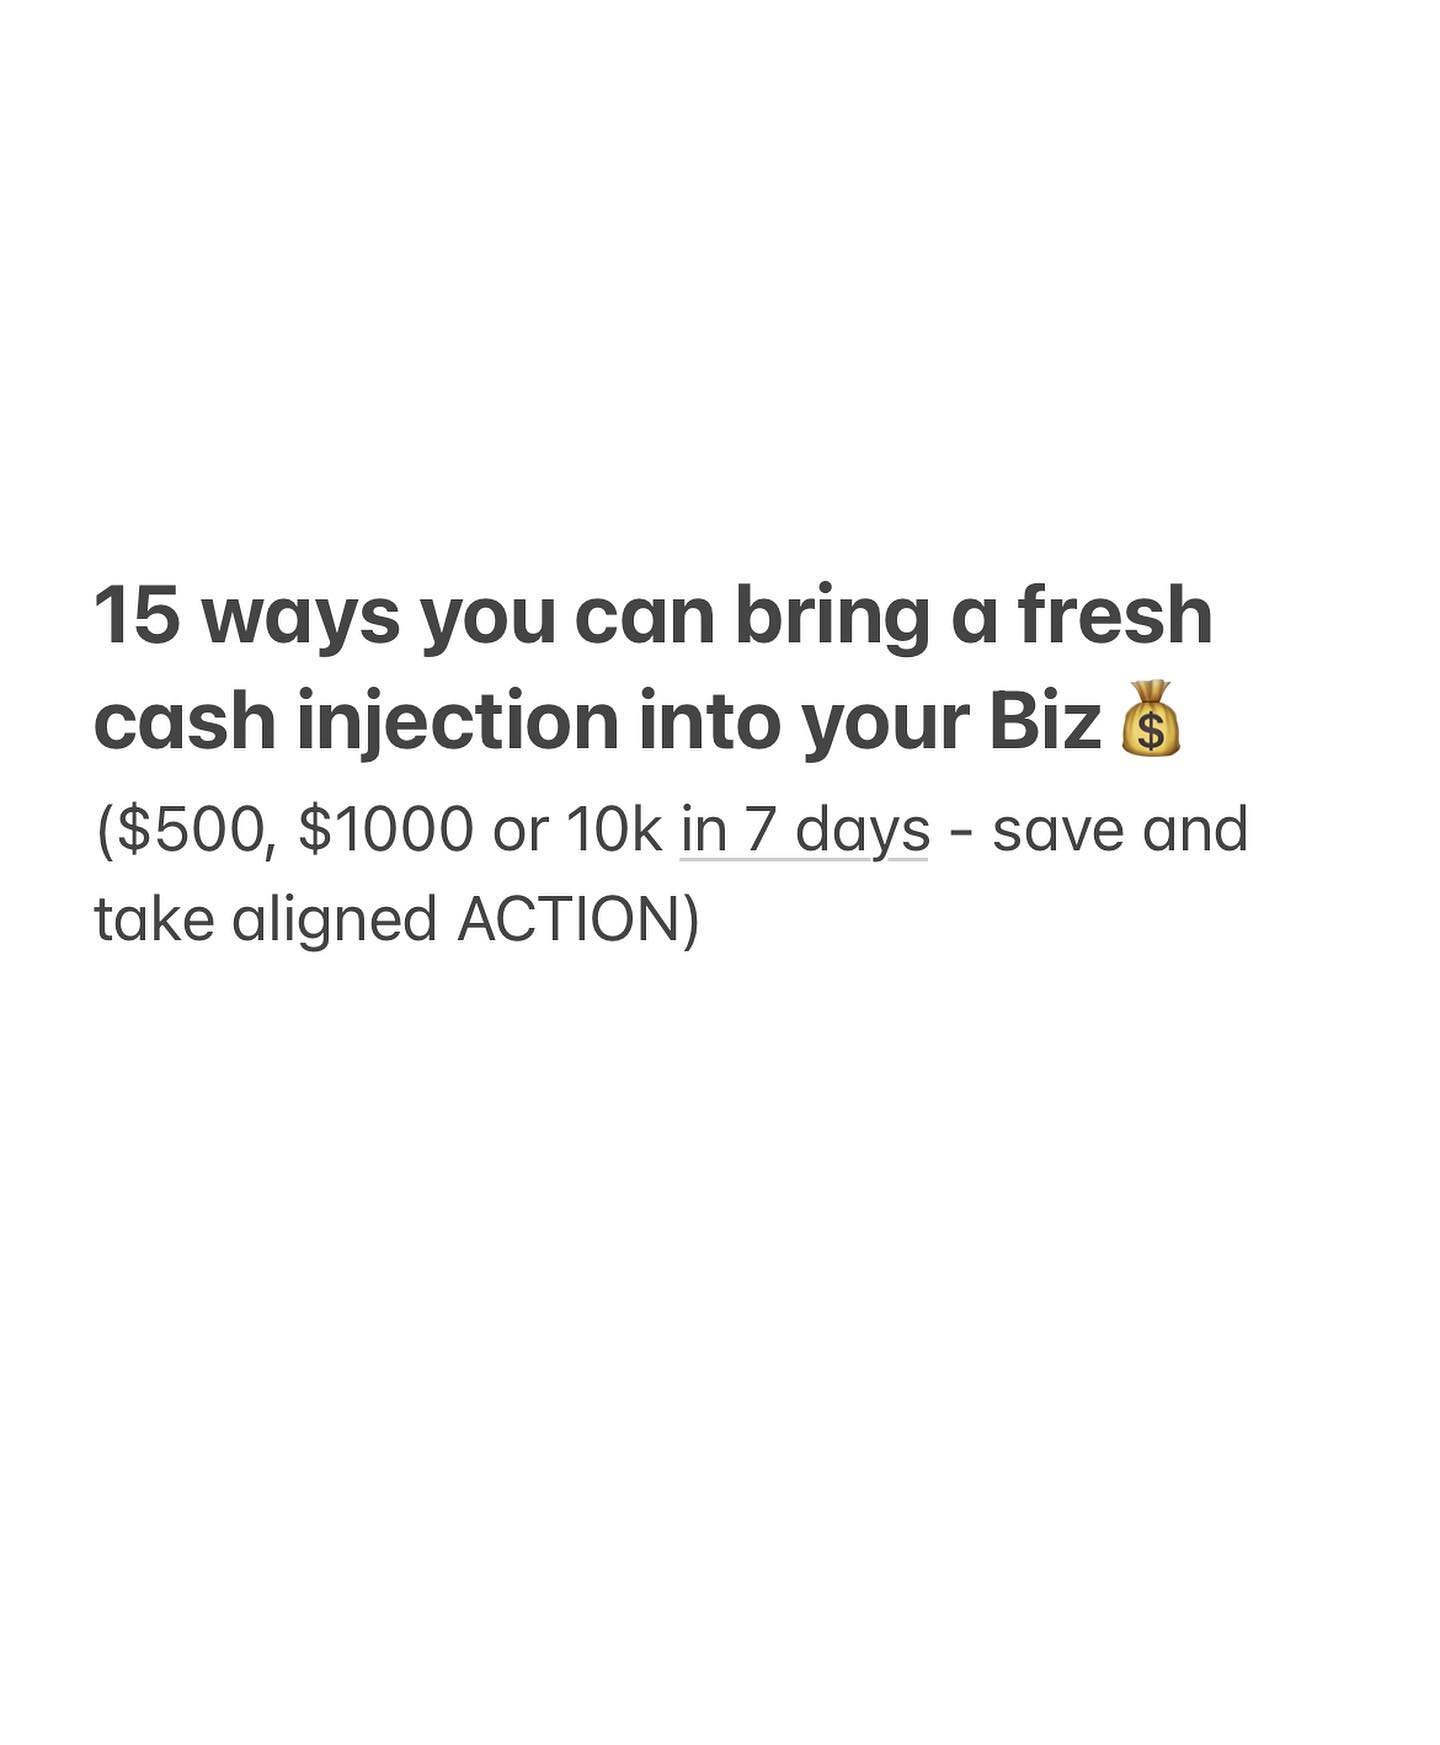 15 ways you can bring a fresh cash injection into your Biz💰 
($500, $1000 or 10k in 7 days - save and take aligned ACTION) 

Drop a 🔥 if this activated something in you!!! Xo